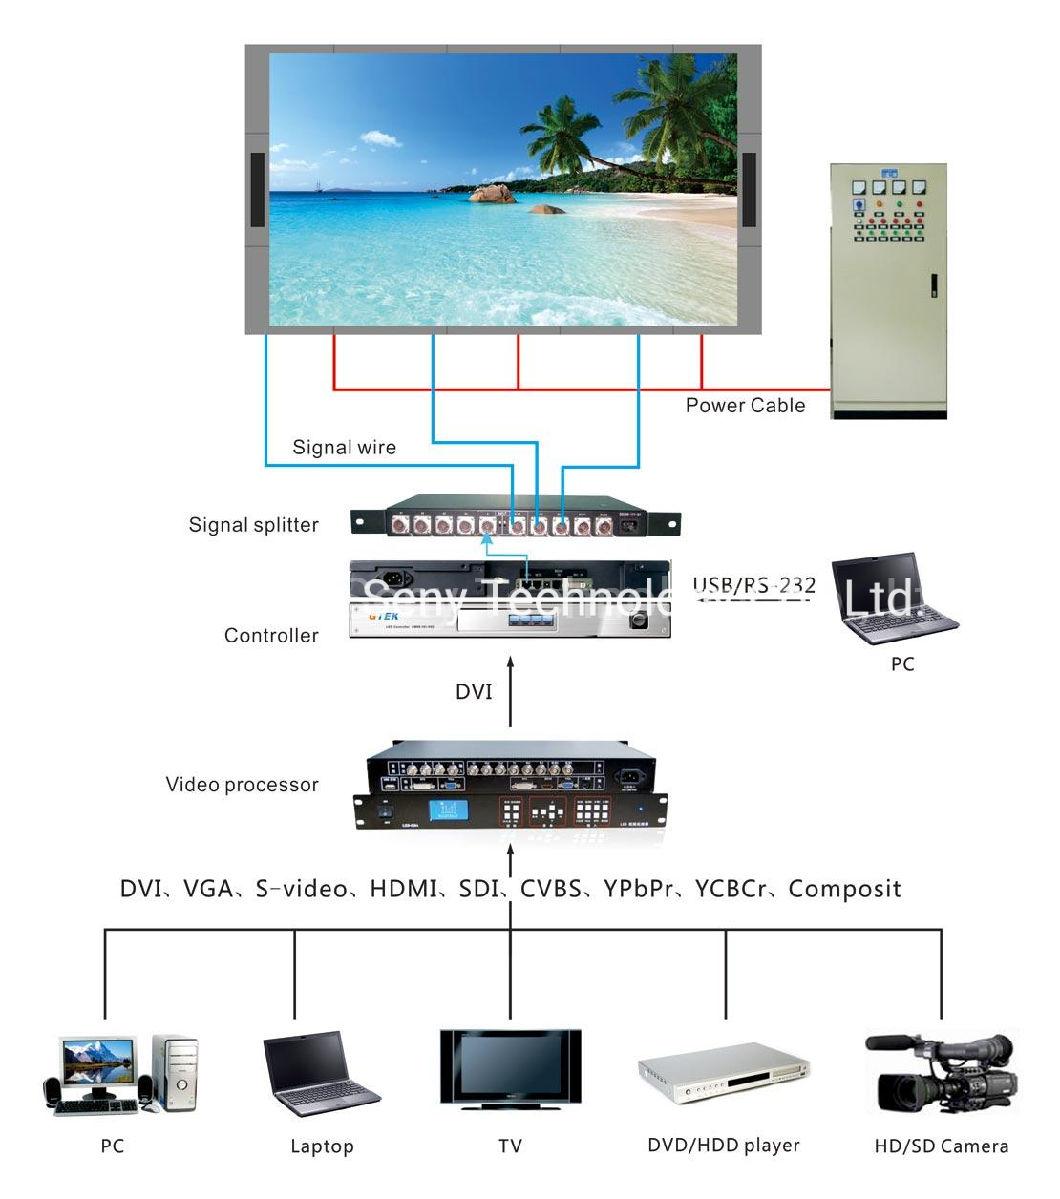 2021 New Arrival LED Display Full Color TV Panel P2 P2.5 P3 Video Wall LED Screens